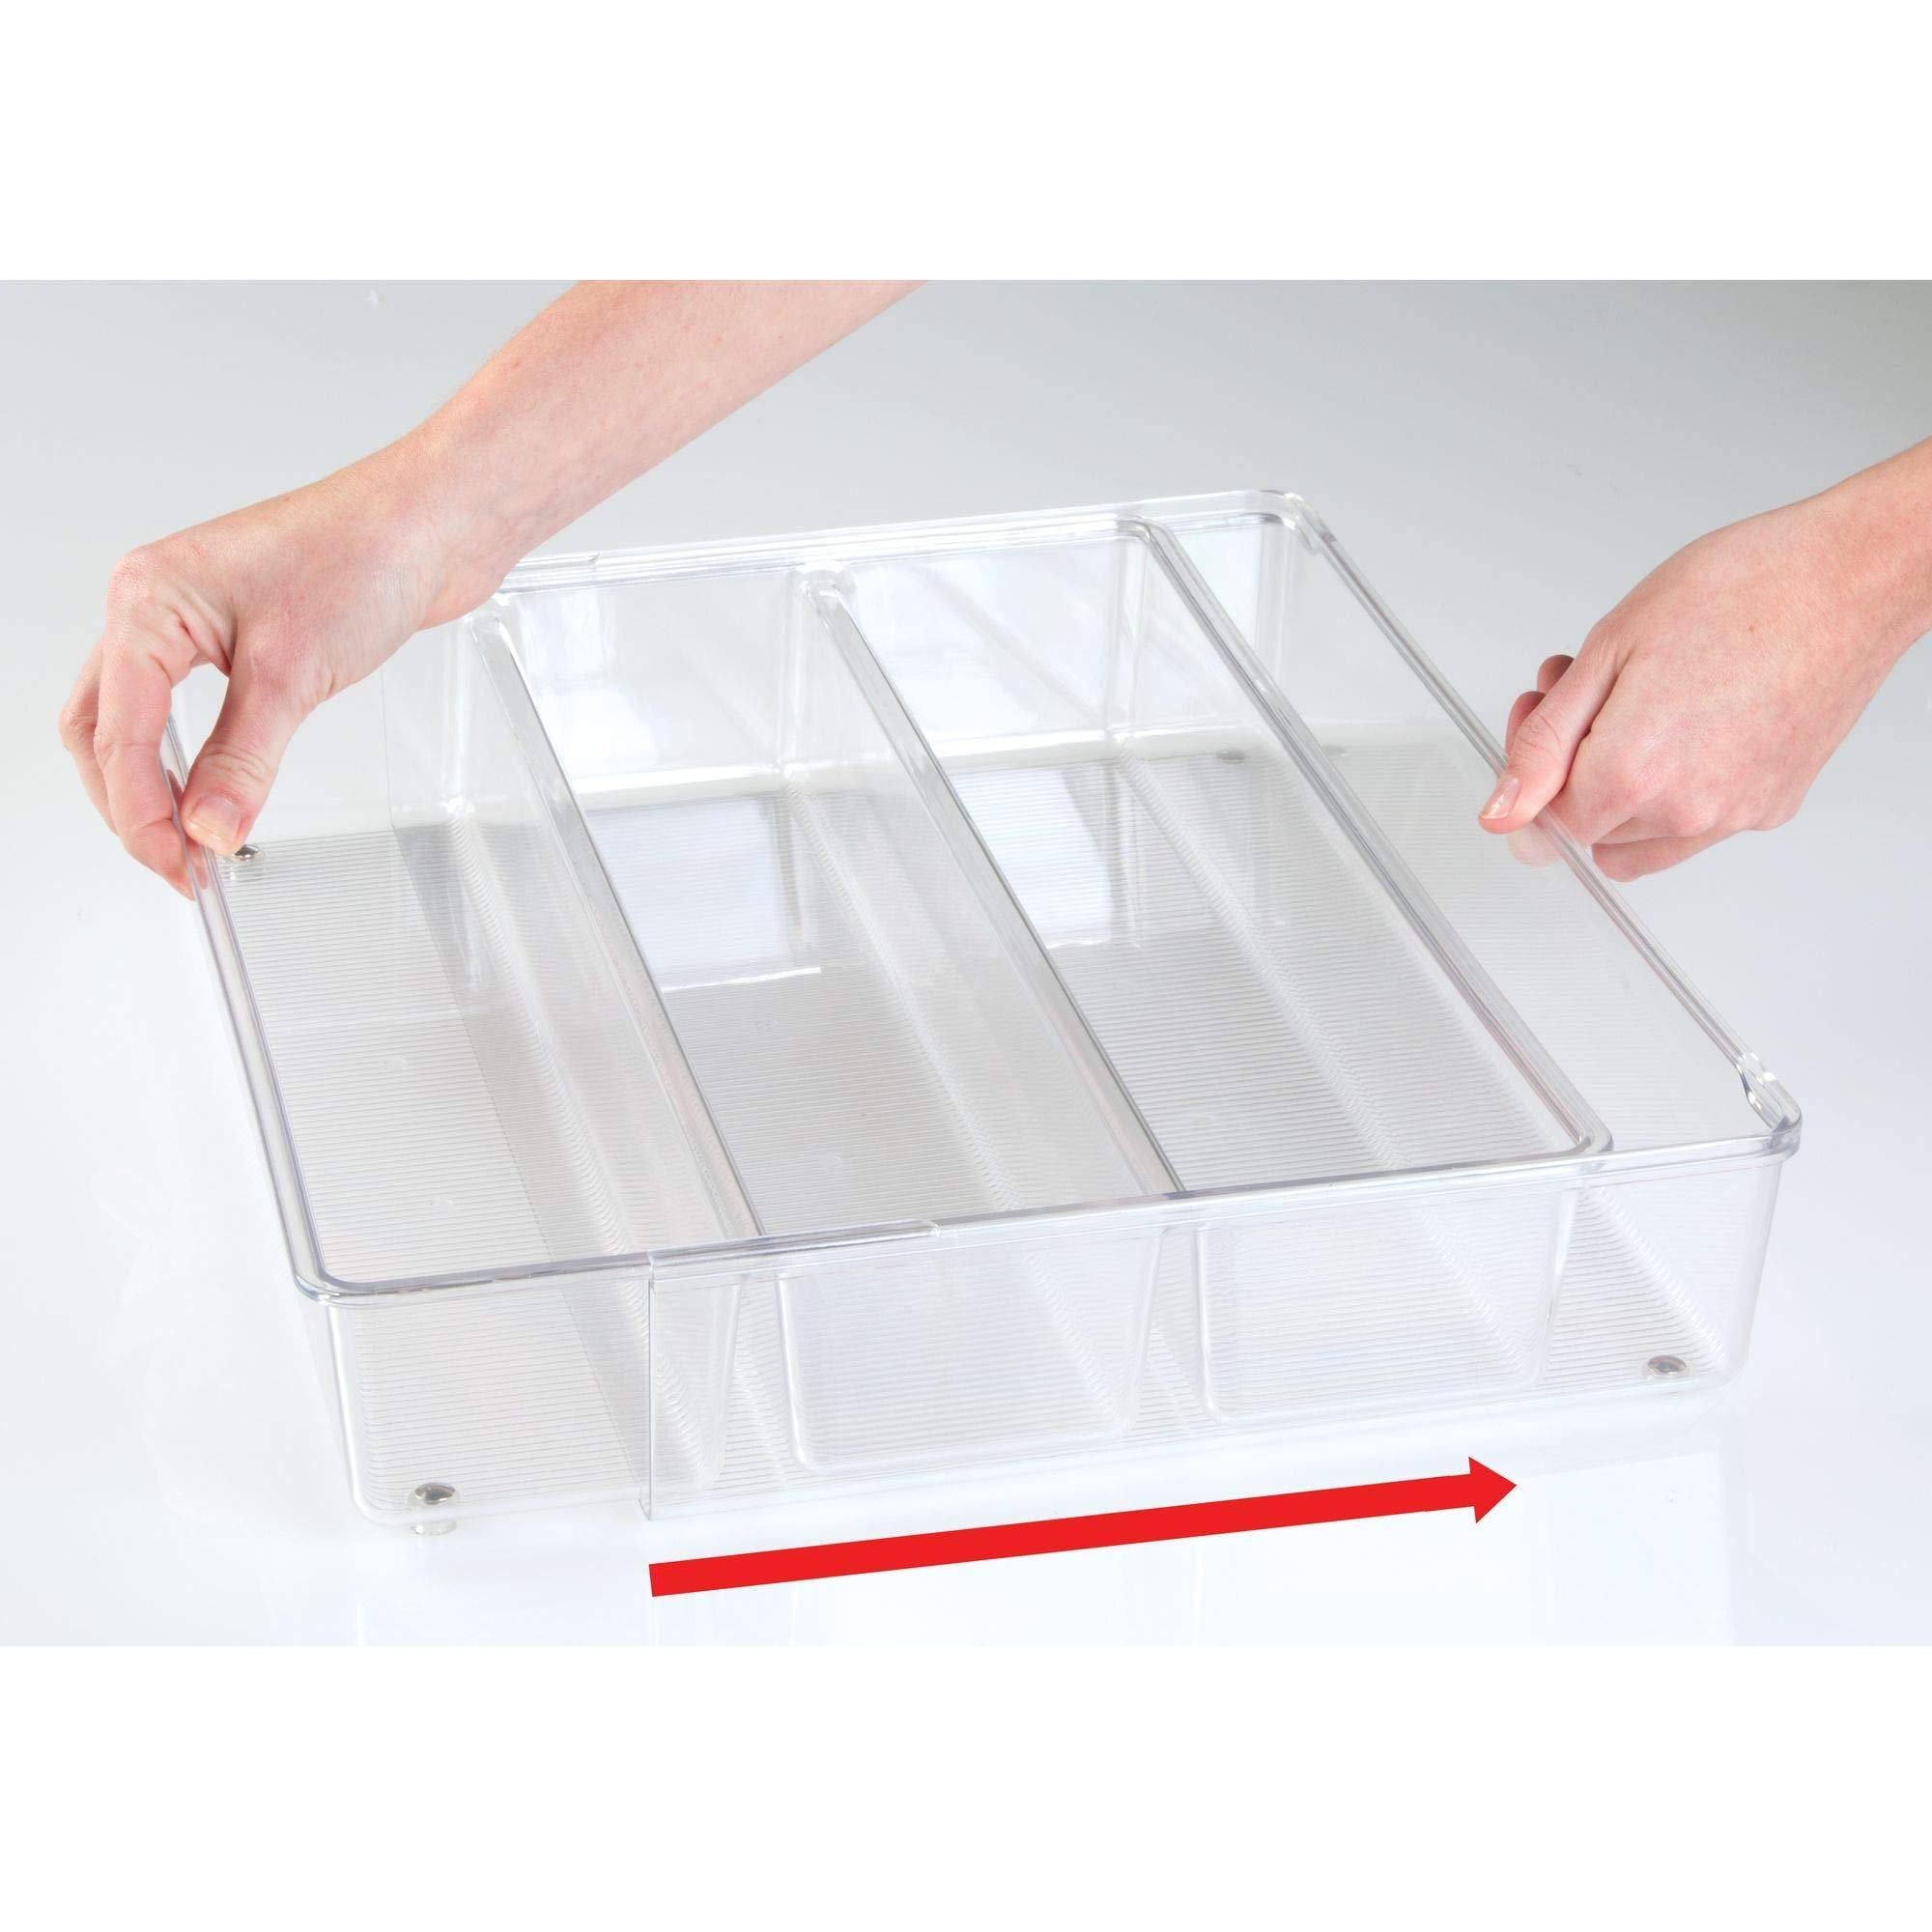 Amazon best mdesign adjustable expandable 4 compartment kitchen cabinet drawer organizer tray divided sections for cutlery serving cooking utensils gadgets bpa free food safe 3 deep pack of 2 clear